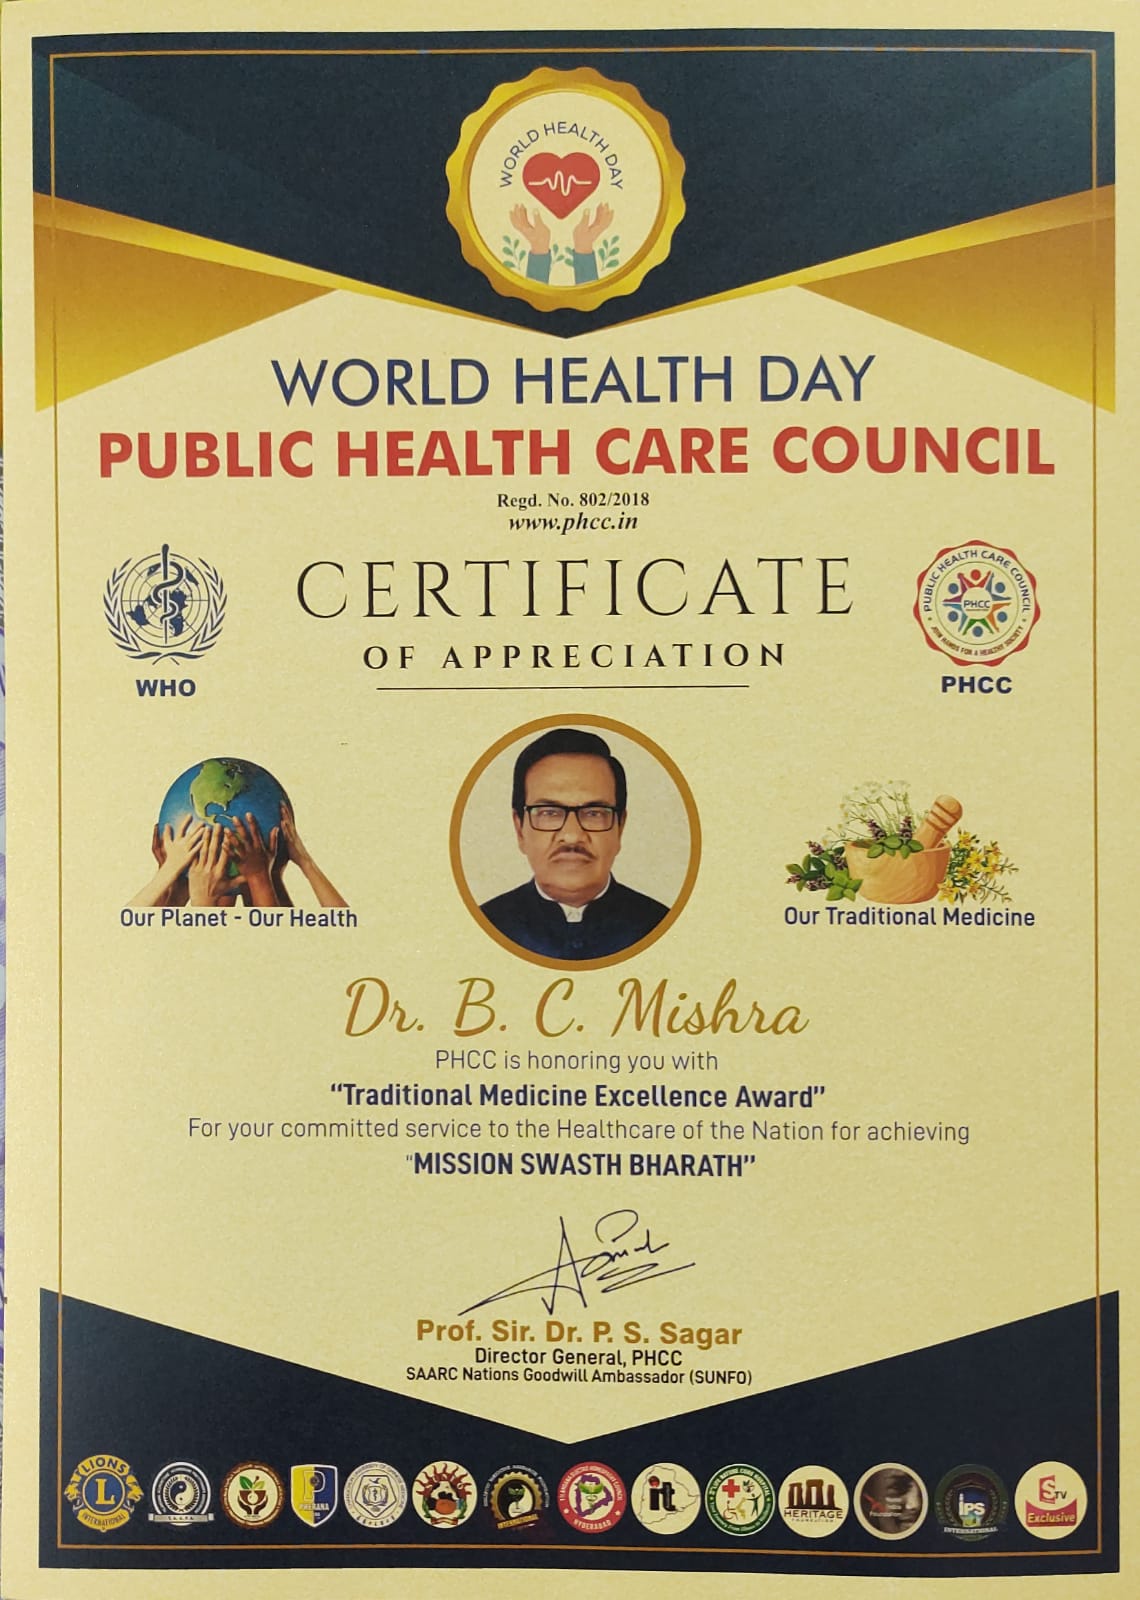 traditional medicine excellence award given to B.C. Mishra - Visakhapatnam